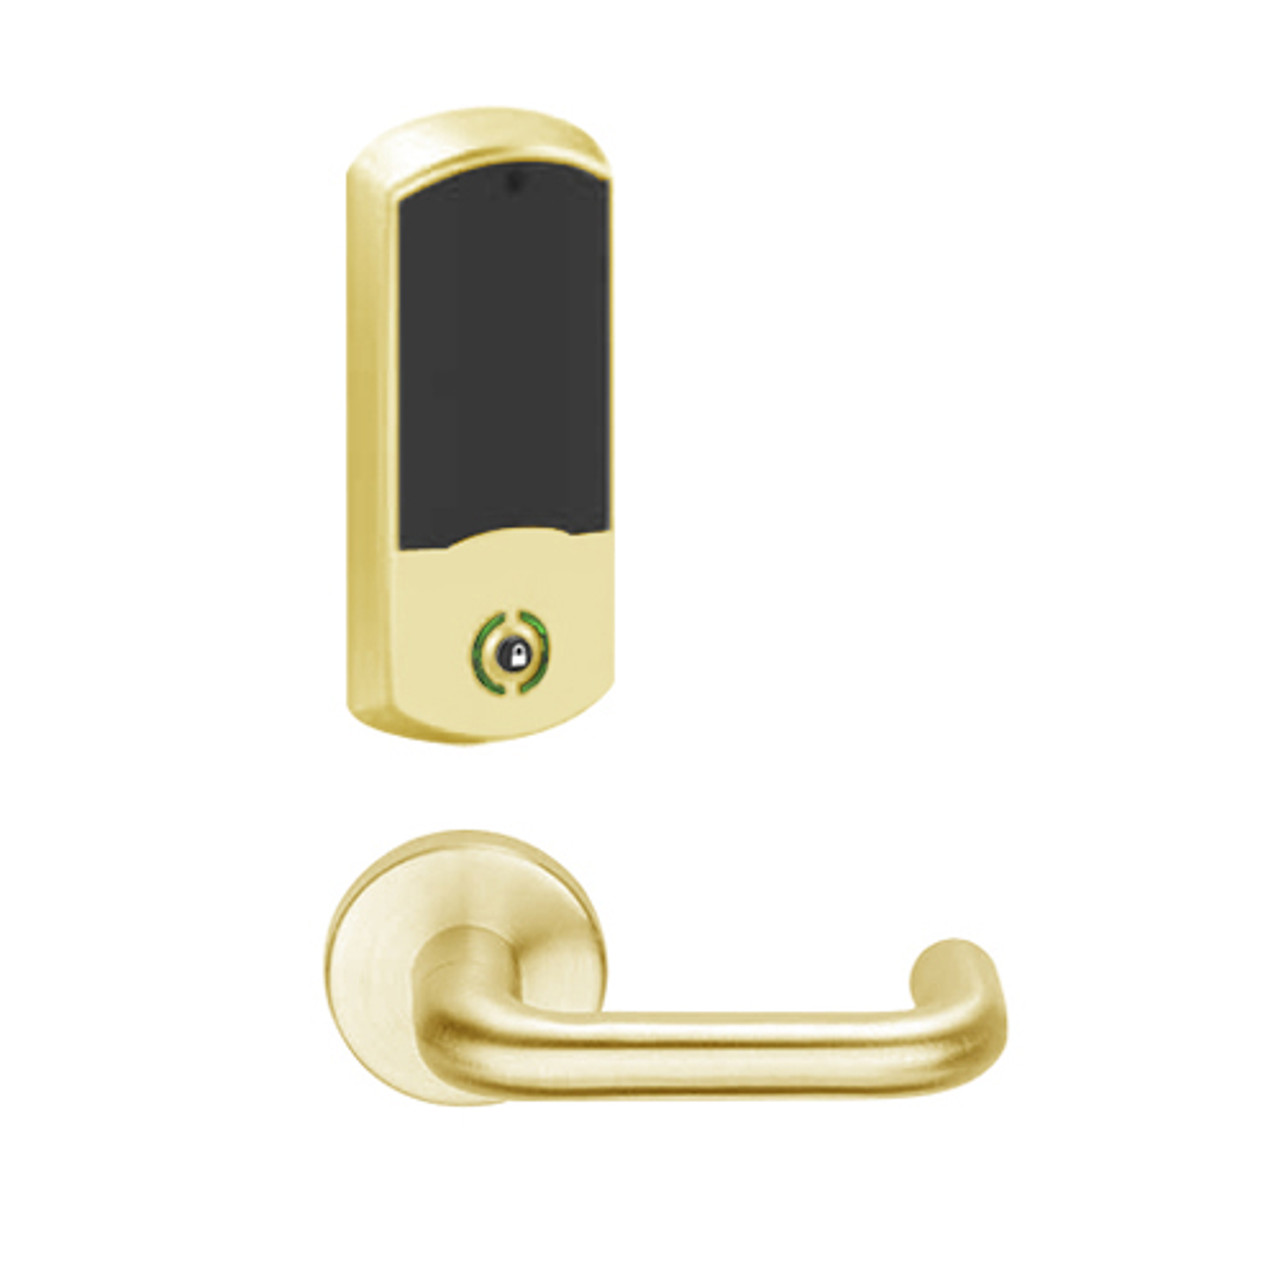 LEMB-GRW-L-03-605-00C Schlage Less Cylinder Privacy/Office Wireless Greenwich Mortise Lock with Push Button & LED Indicator and Tubular Lever in Bright Brass